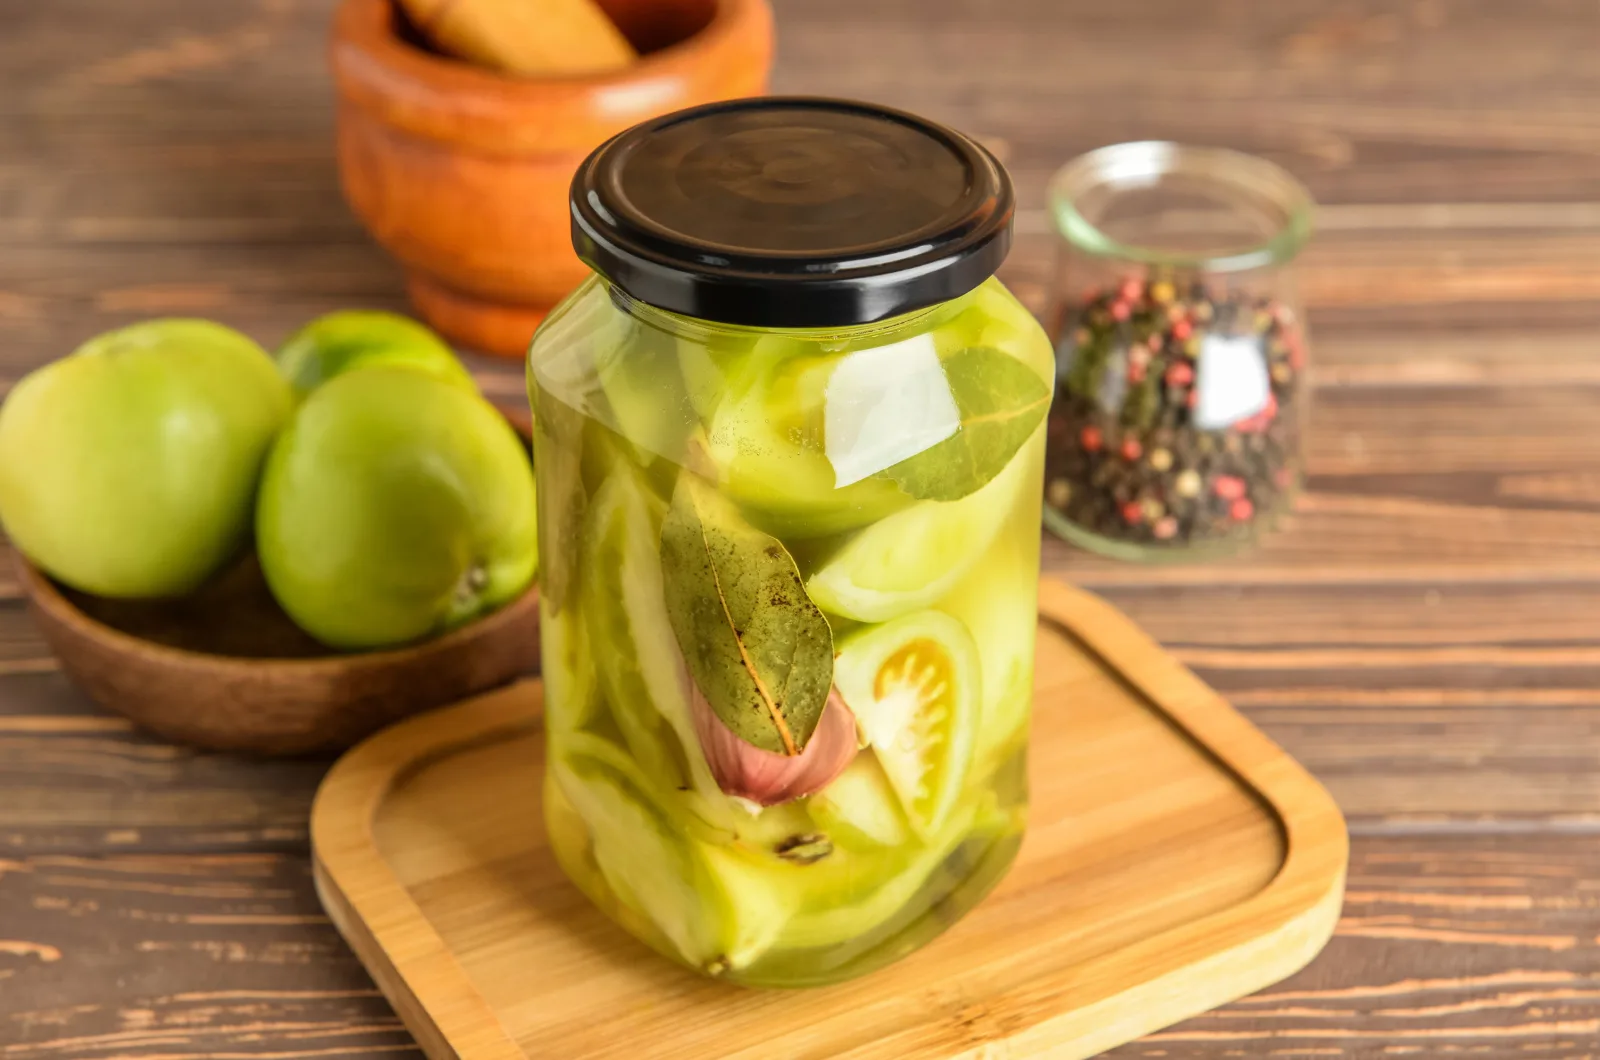 Jar with canned green tomatoes on wooden background